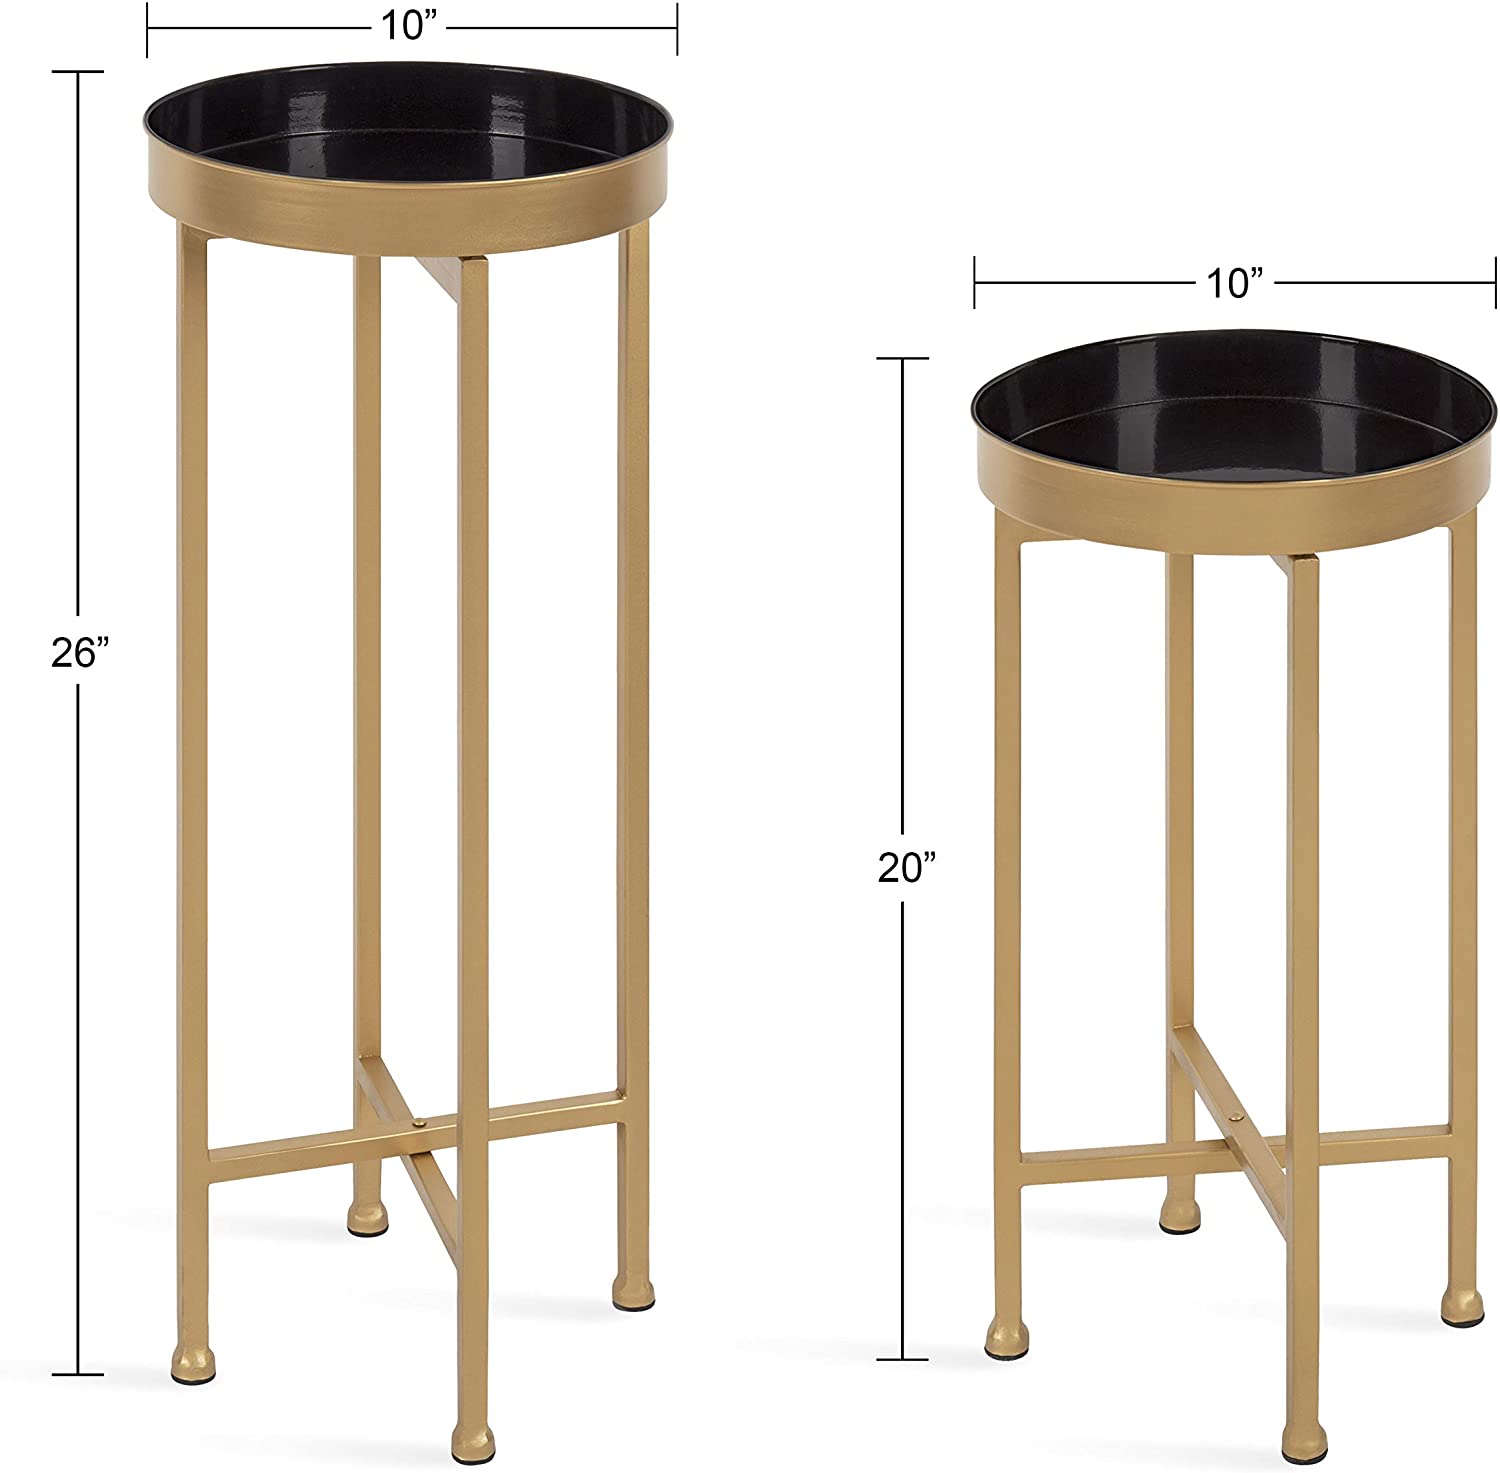 Nest Of Tables: Set of 2, Gold and Black, Decorative Modern Glam End Table